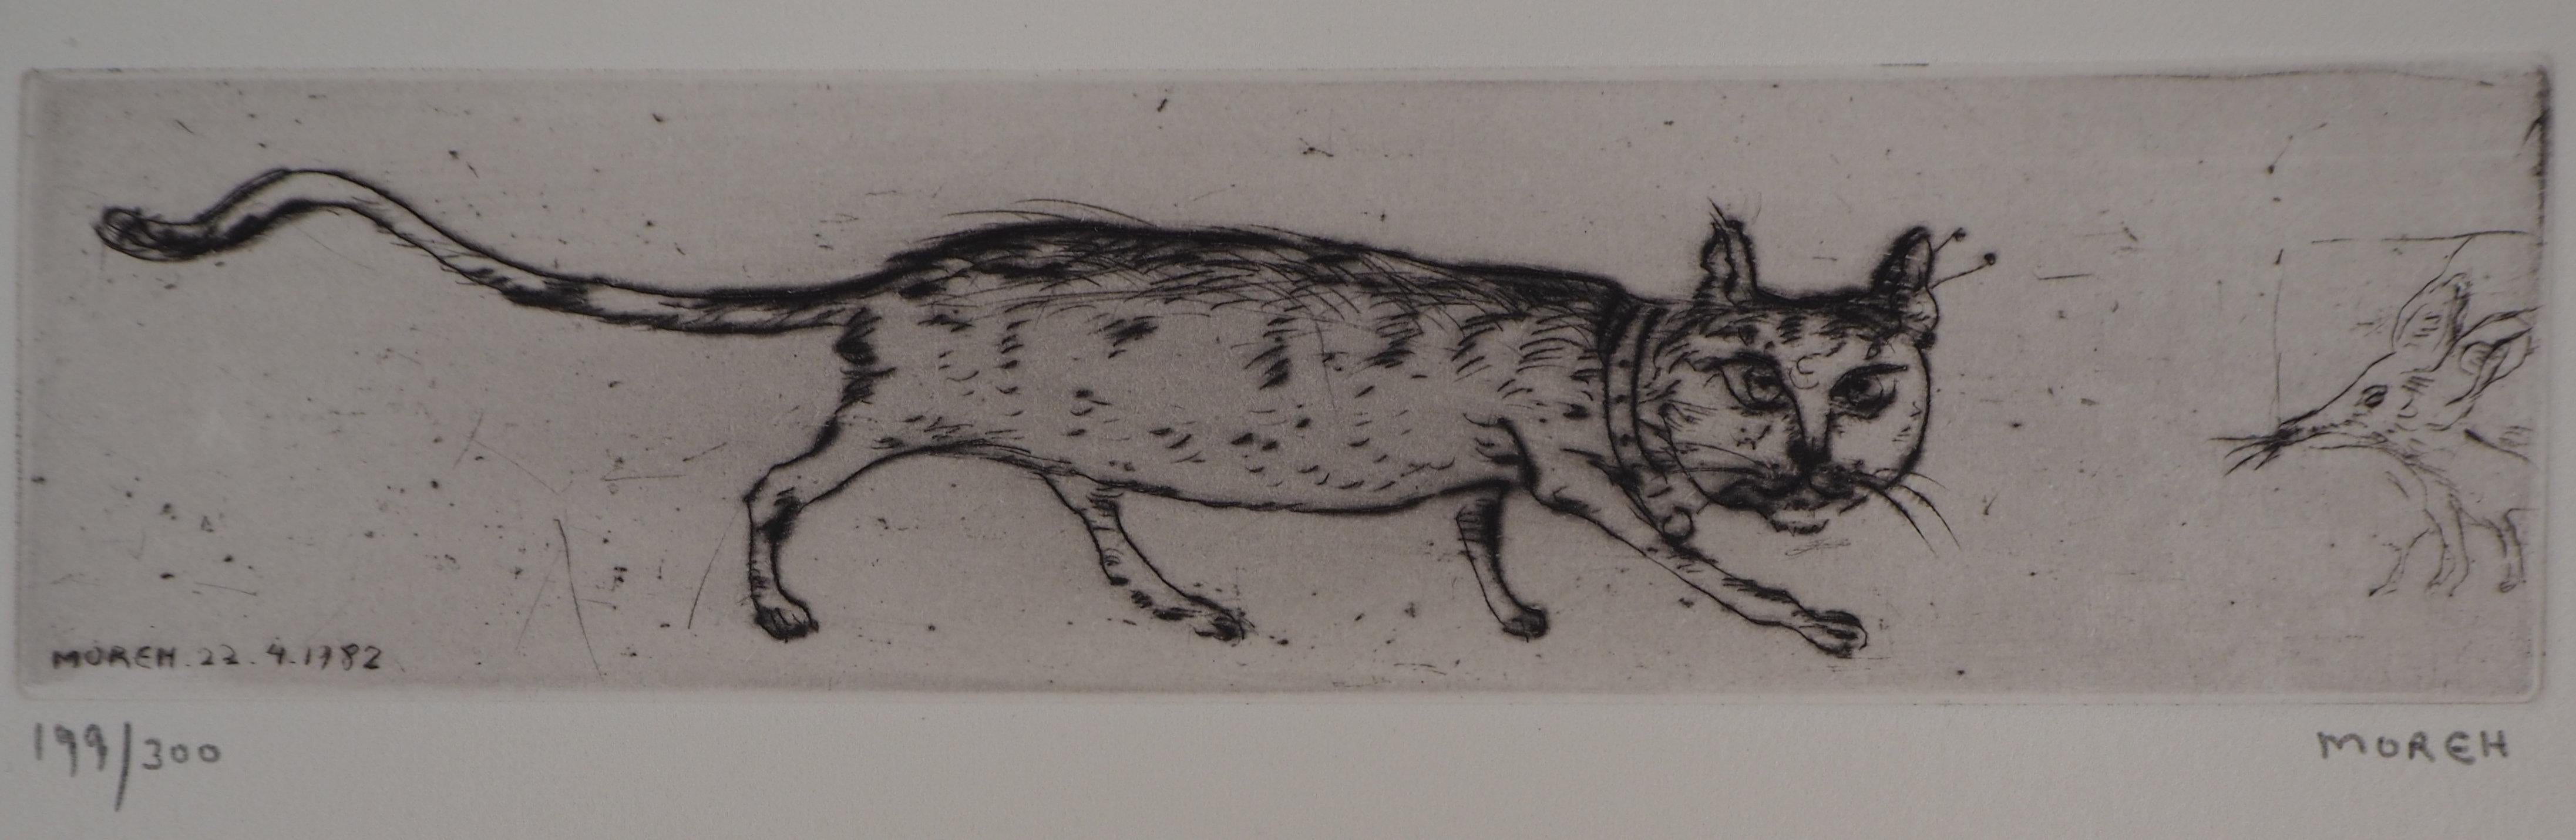 Cat and Mouse : Original etching, Handsigned - Print by Mordecai Moreh